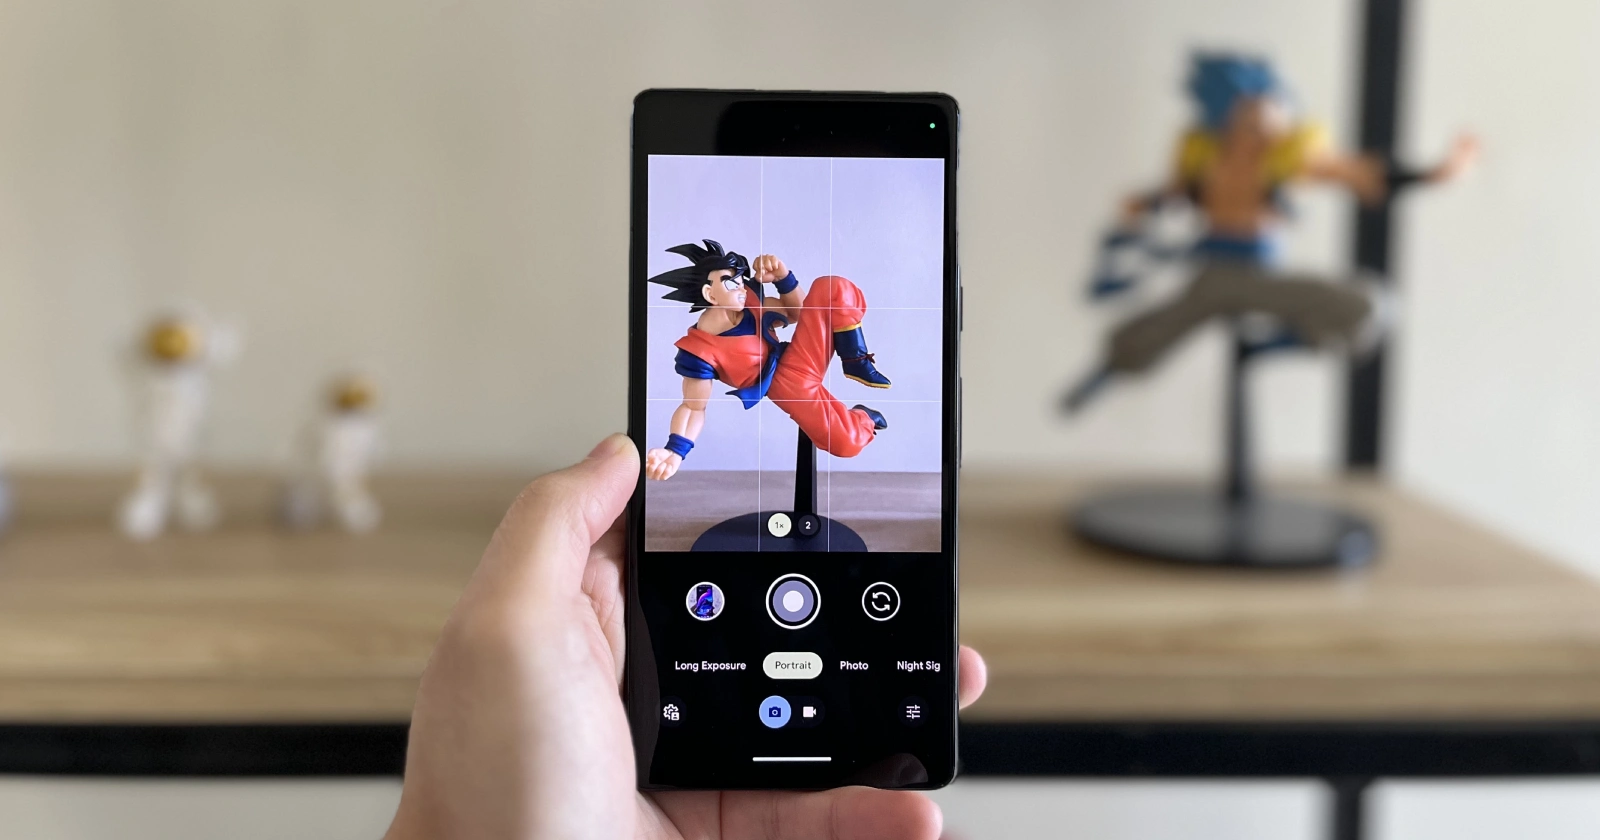 Unable to adjust portrait blur in images captured on your Google Pixel? Try this potential workaround